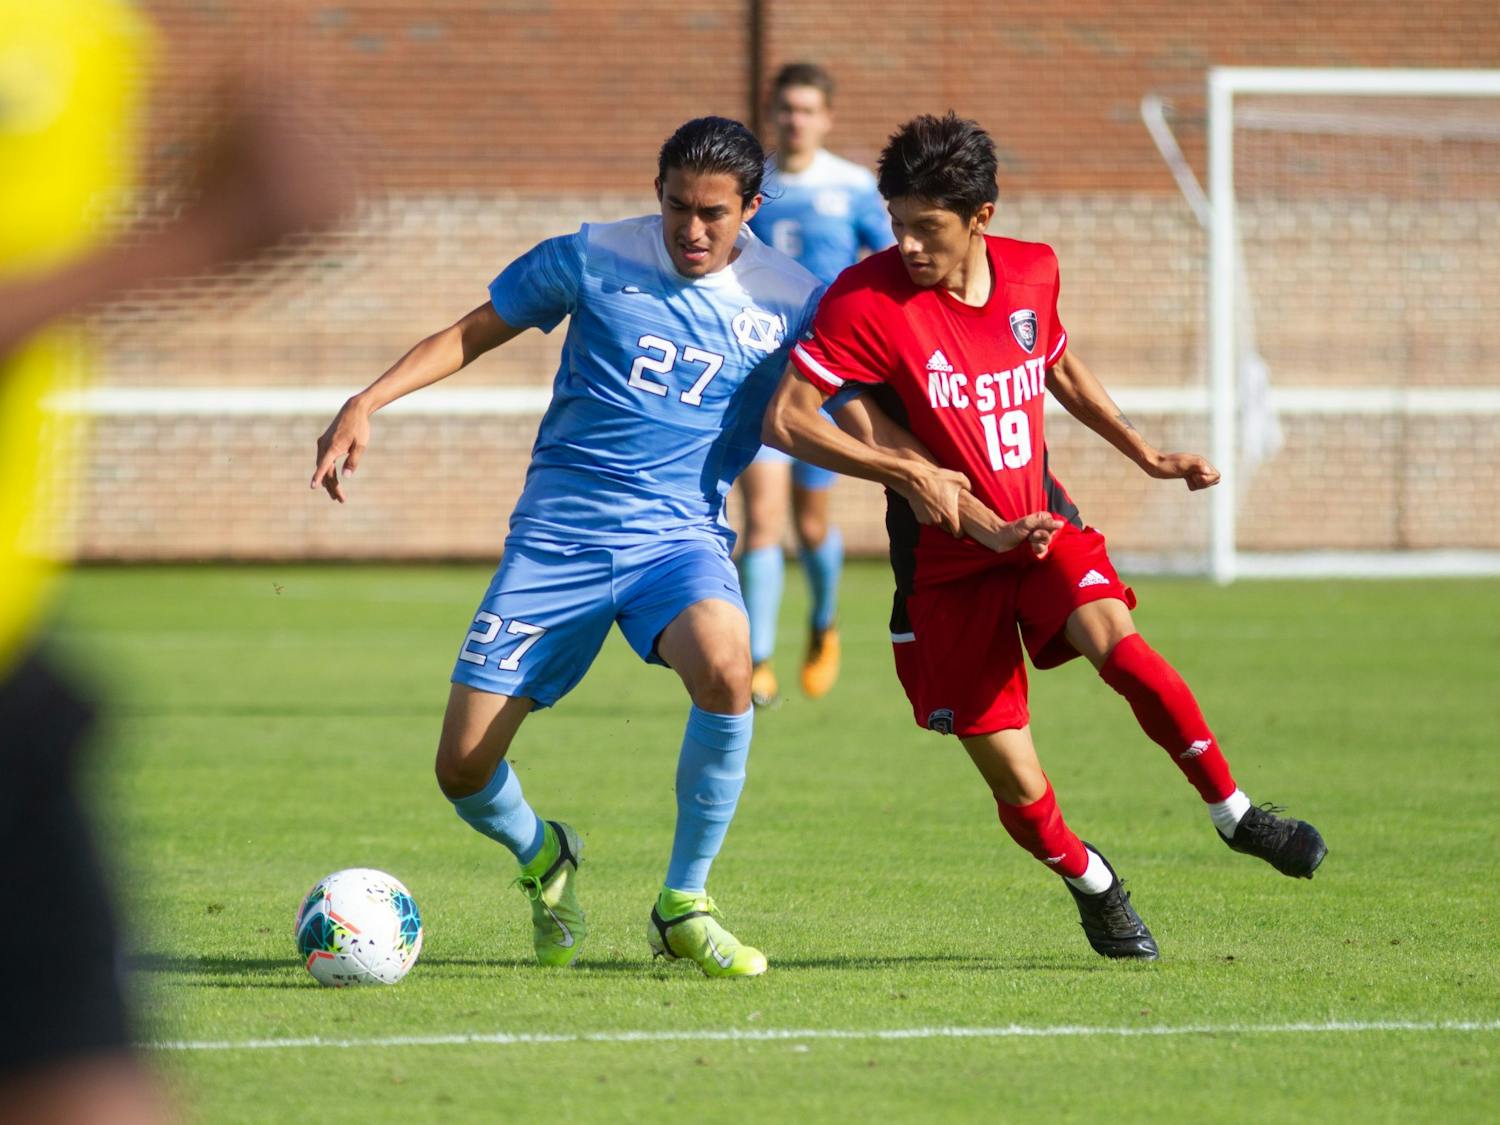 Senior defender Mark Salas (27) fights for a ball during a 0-0 draw against NC State on Sunday, Nov. 1, 2020.